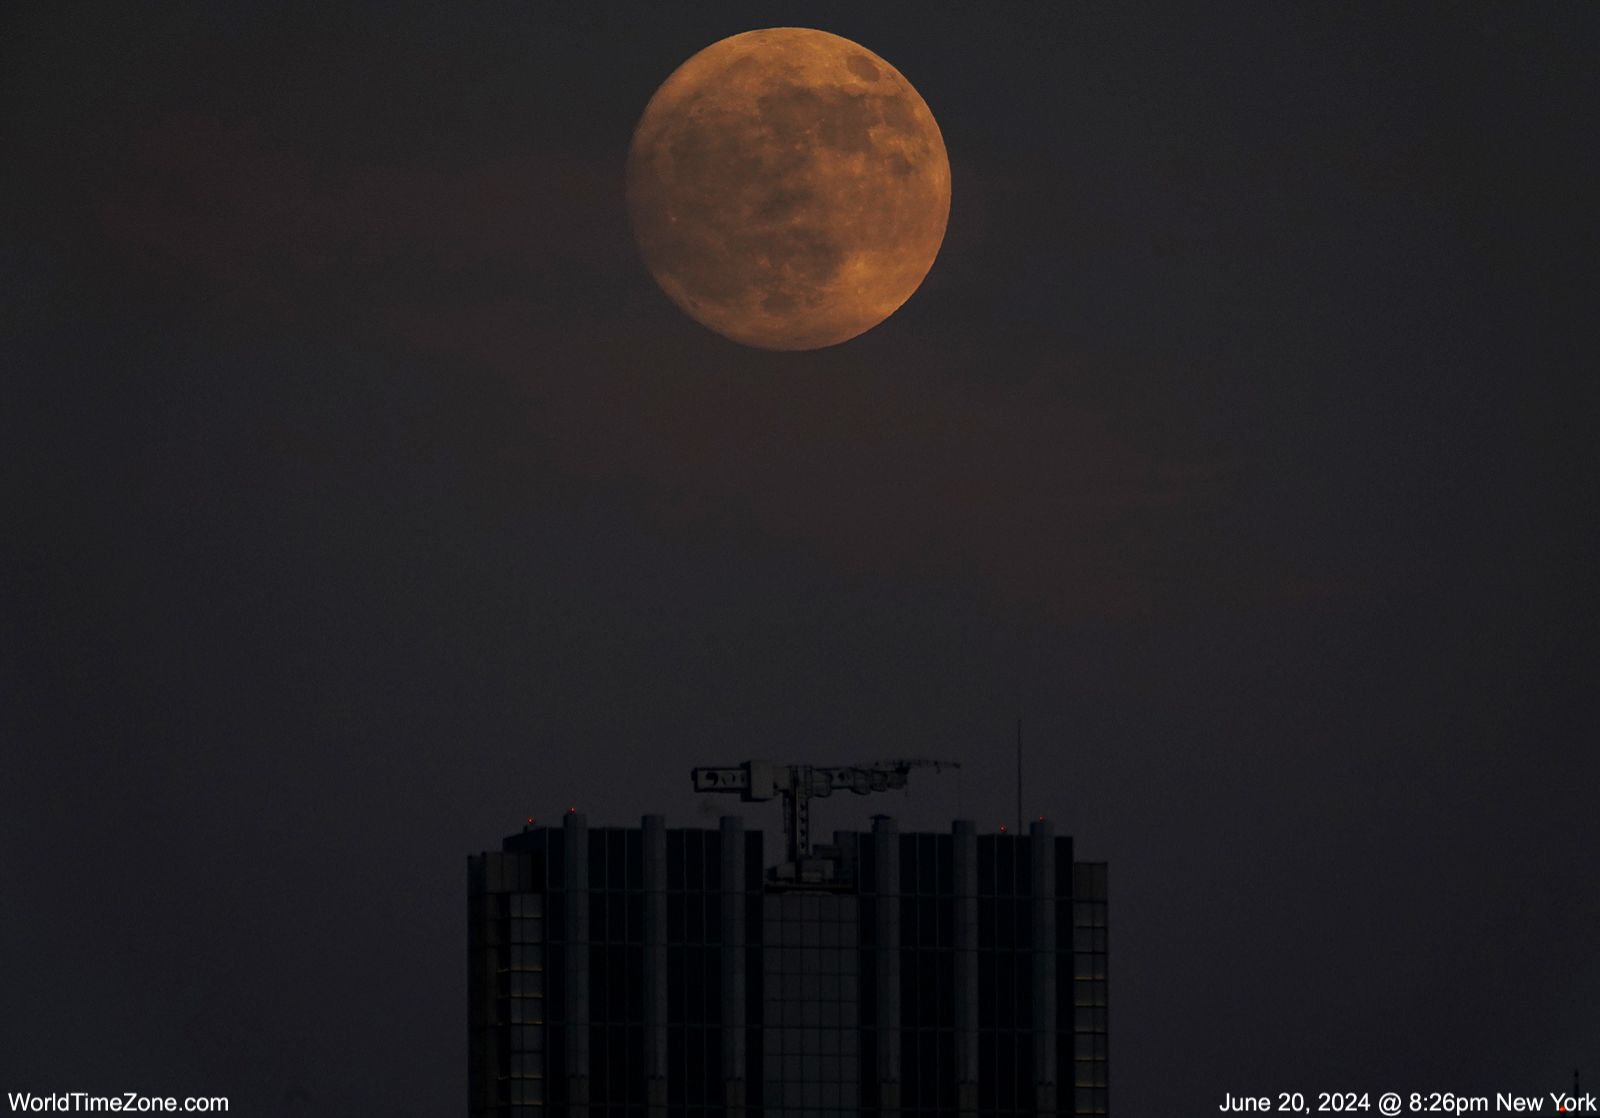 Community photo entitled Summer Solstice Moon rises above Manhattan buildings in New York City. by Alexander Krivenyshev on 06/20/2024 at Manhattan, New York